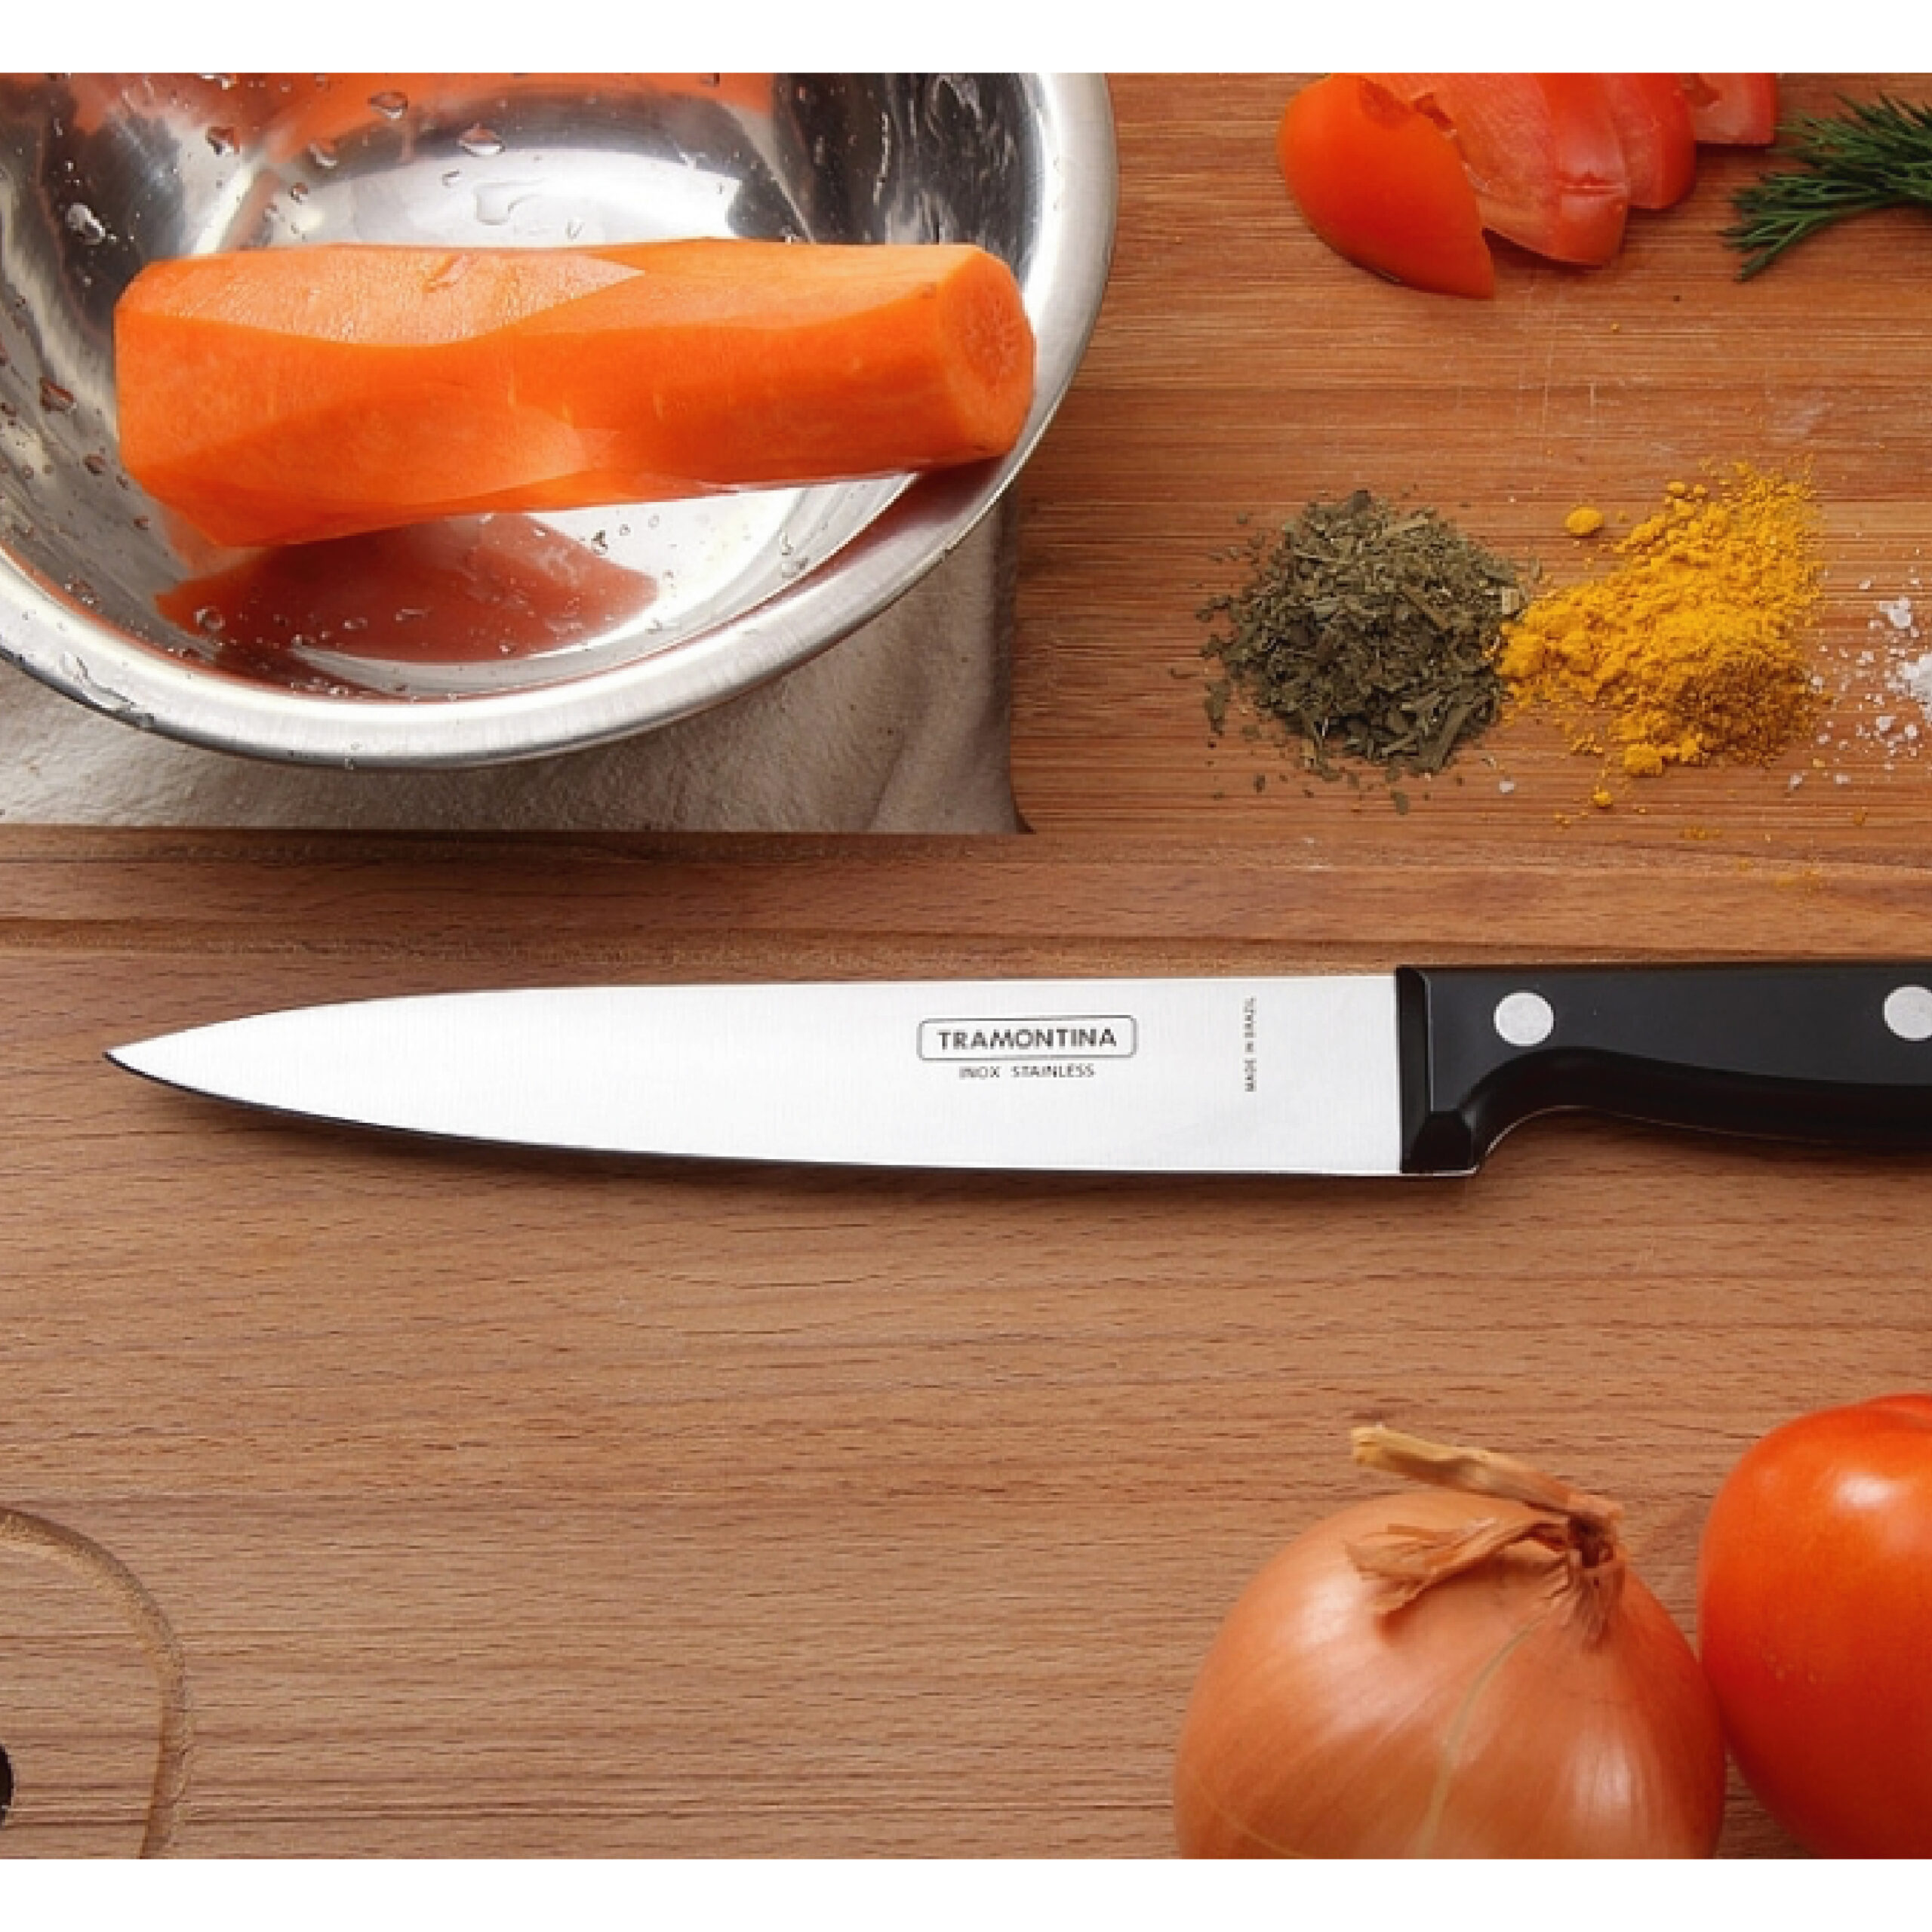 Tramontina Ultracorte Knife Set With Stainless Steel Blades And